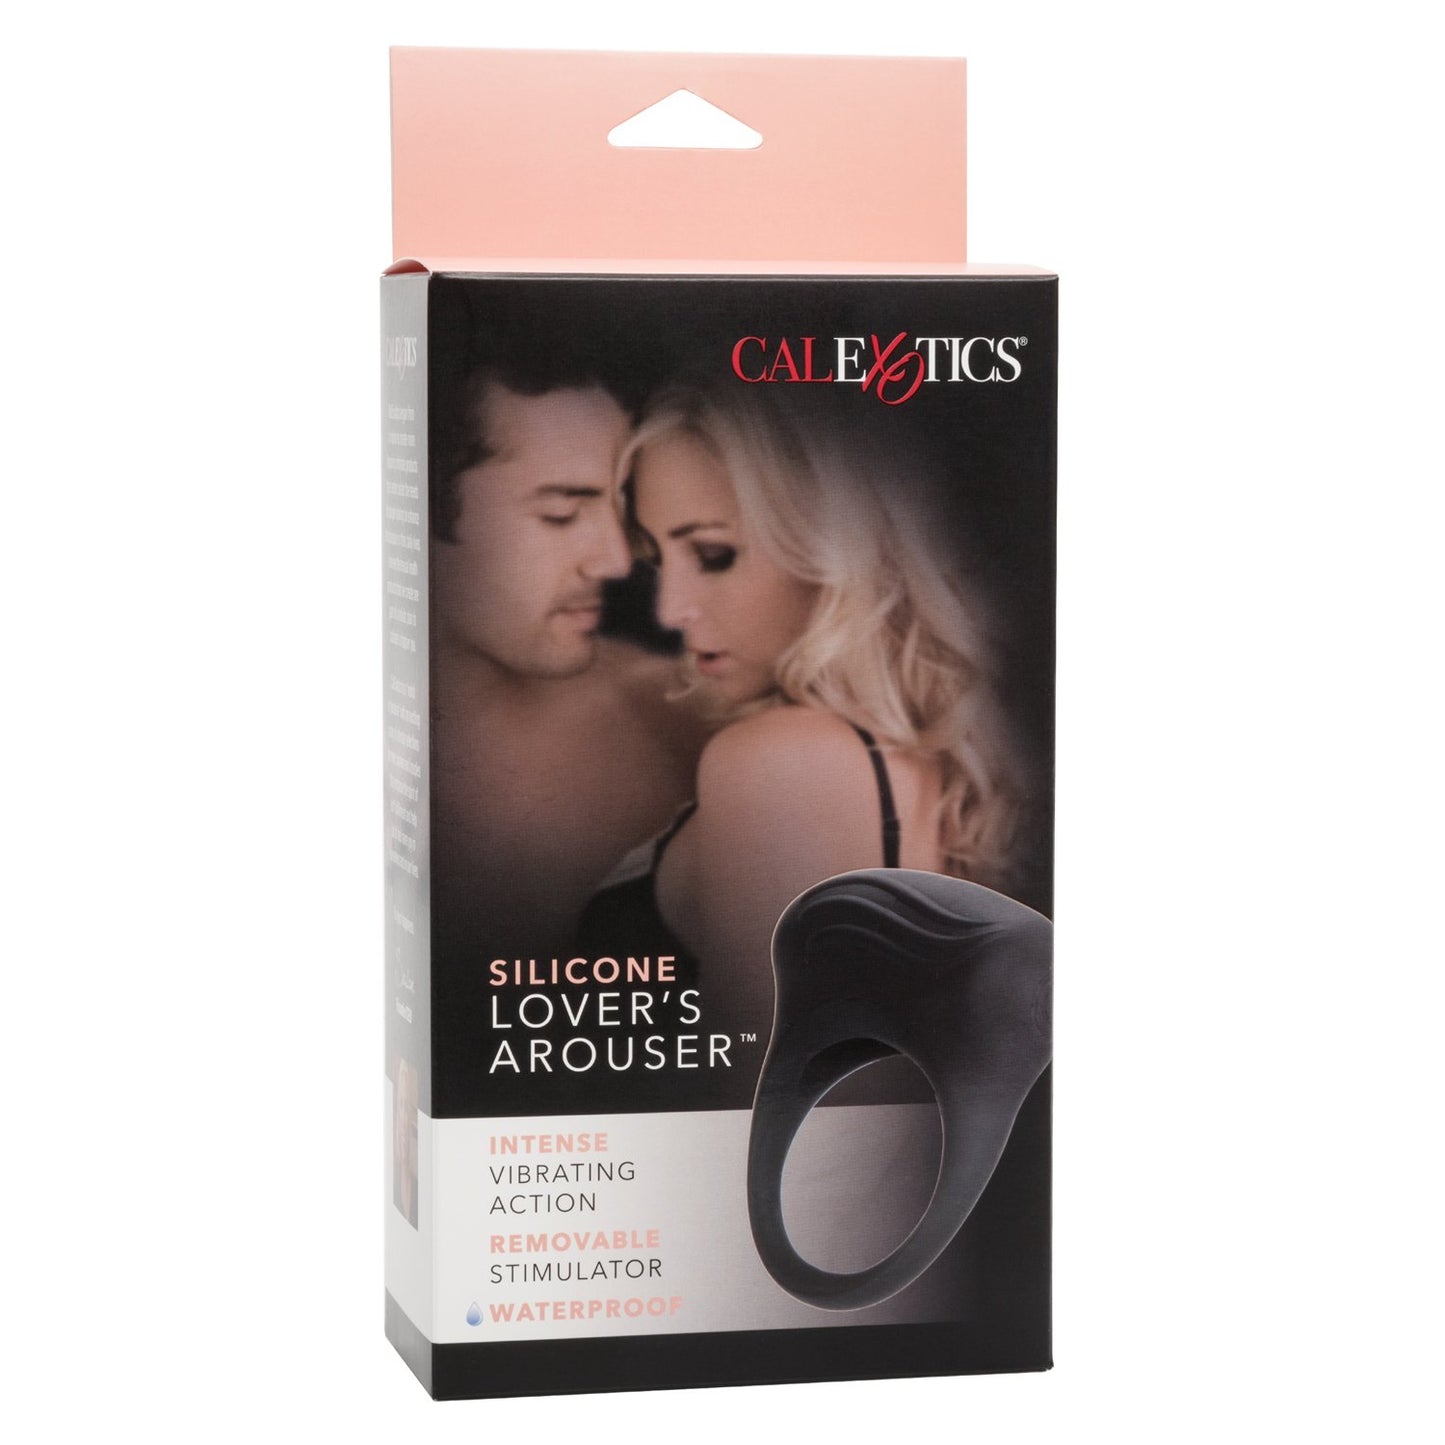 Silicone Lover's Arouser